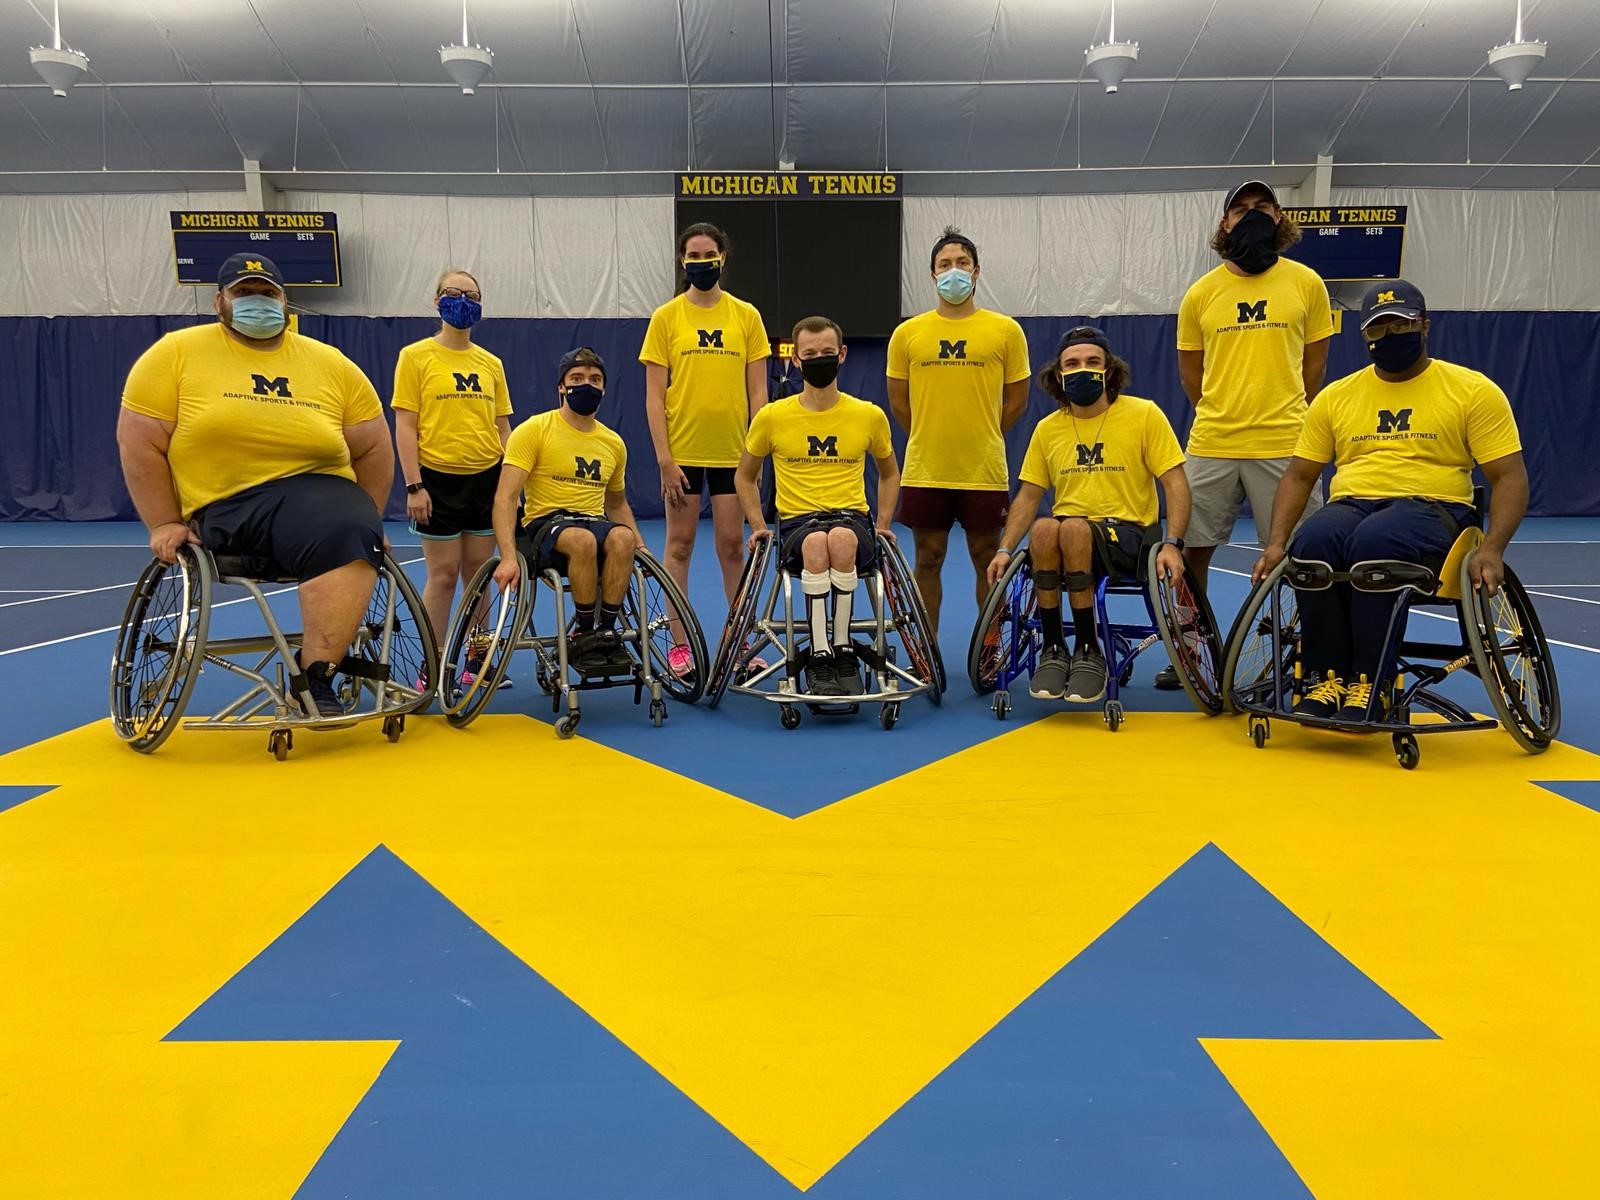 ASAF Tennis Team - Nine athletes in two rows in masks and yellow t-shirts with Block M's. The athletes in the front row are in wheelchairs and the back row is standing. They are on an indoor U-M tennis court. A sign behind them reads "Michigan Tennis"